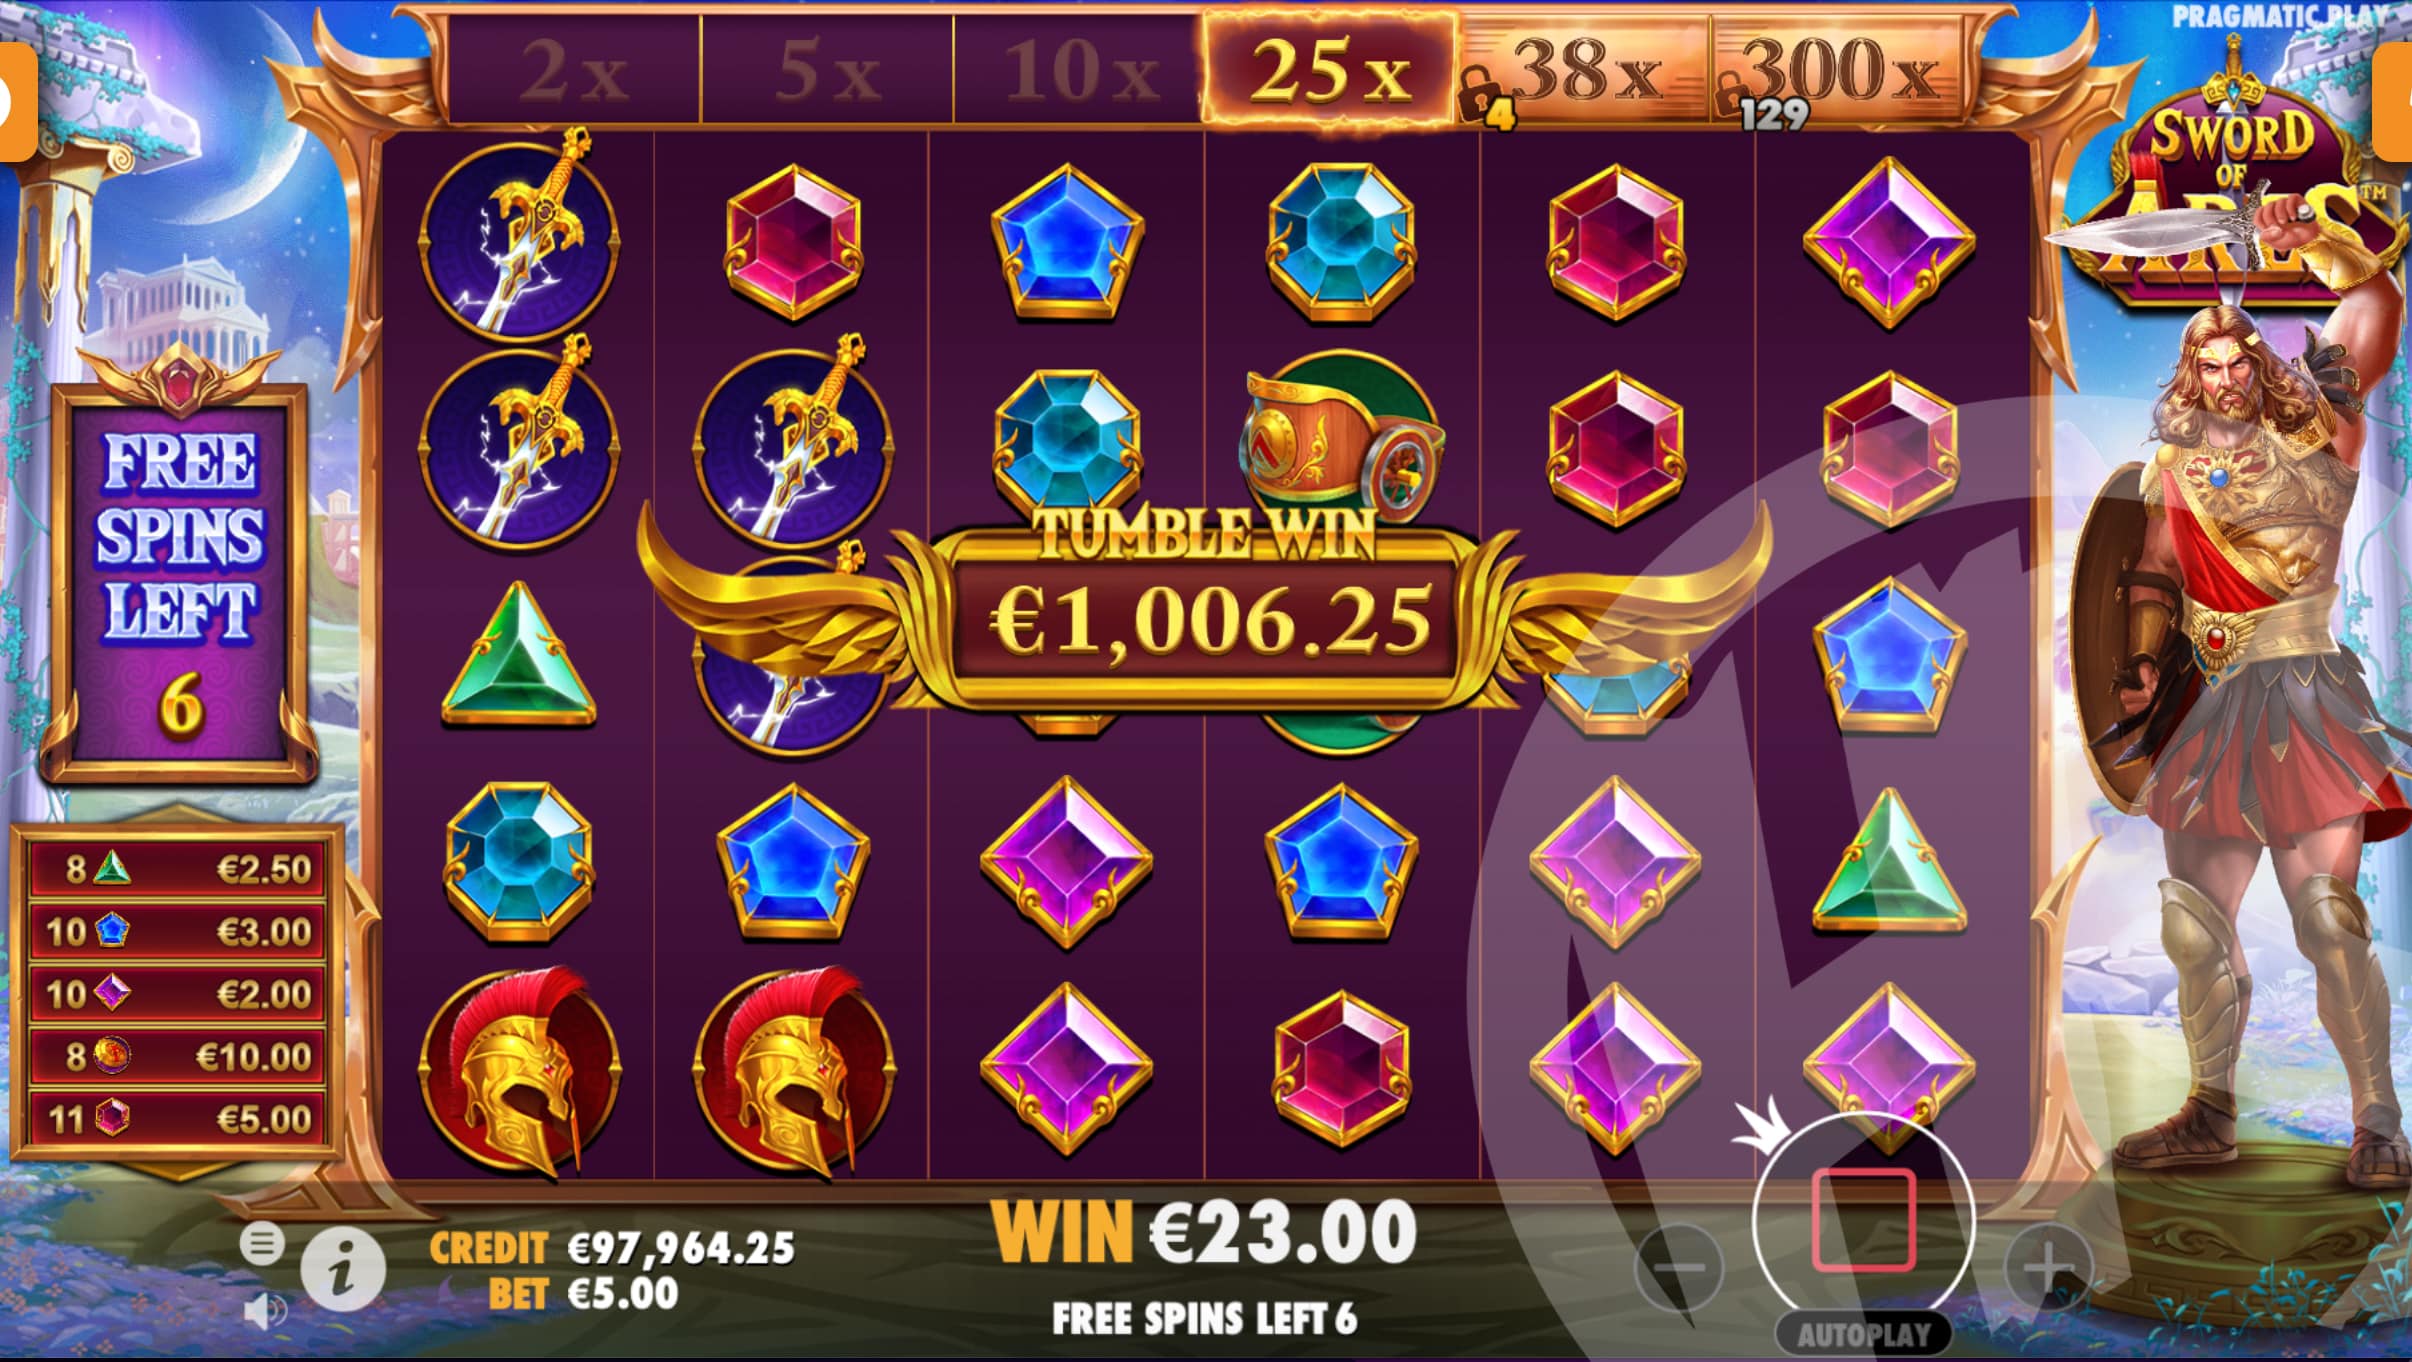 The Highest Unlocked Multiplier is Applied to Tumble Wins